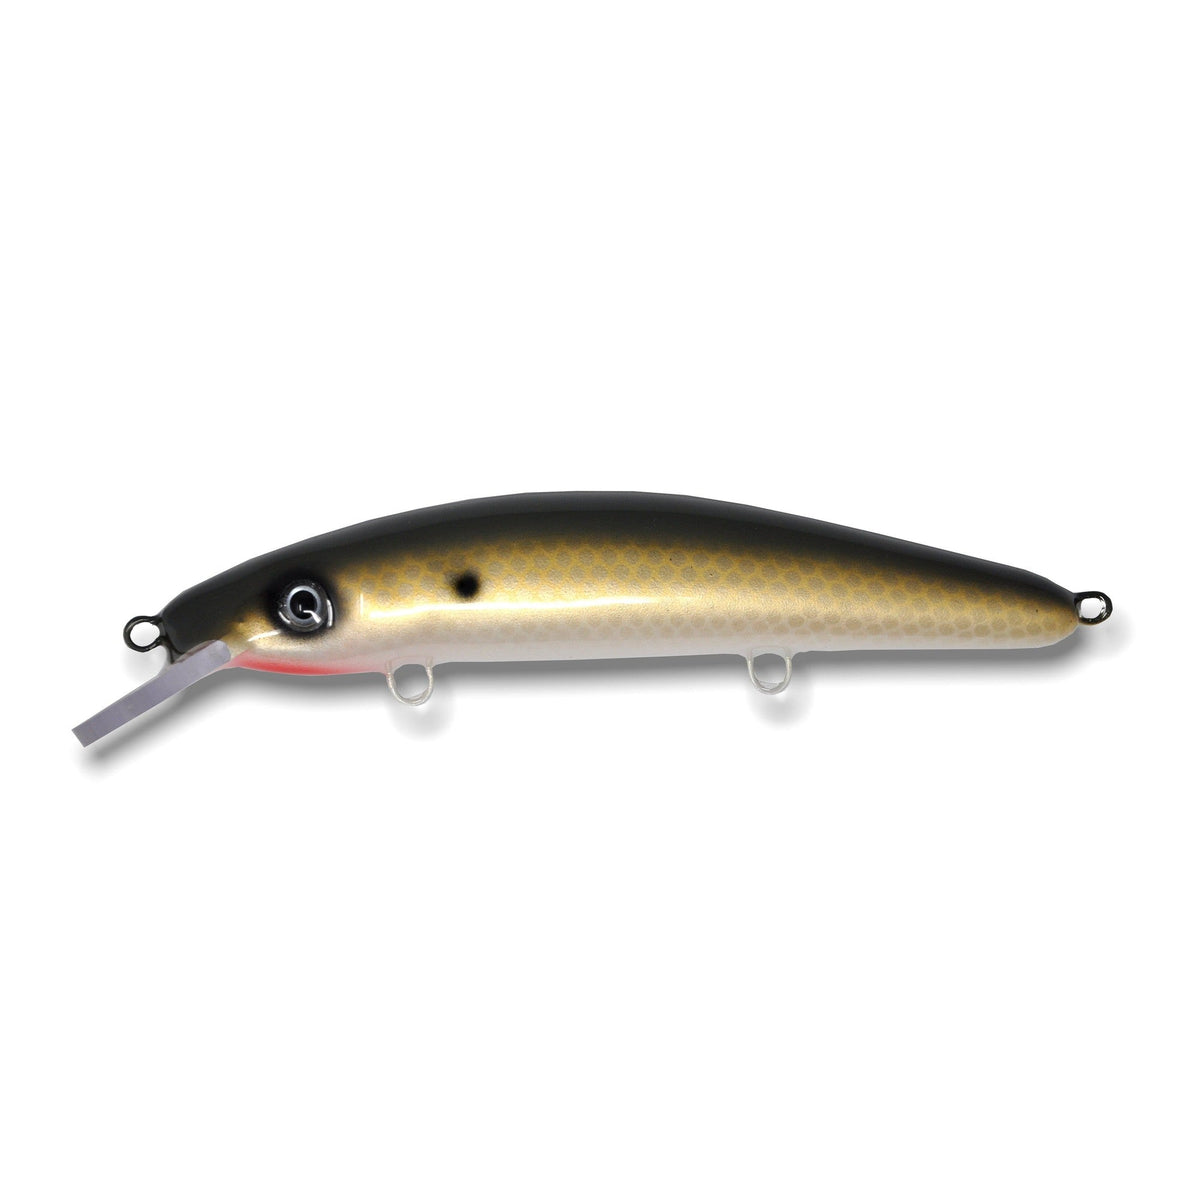 View of Crankbaits Blue Water Baits 9" cisco - shallow Crankbait Gizzard Shad / Pearl Belly available at EZOKO Pike and Musky Shop